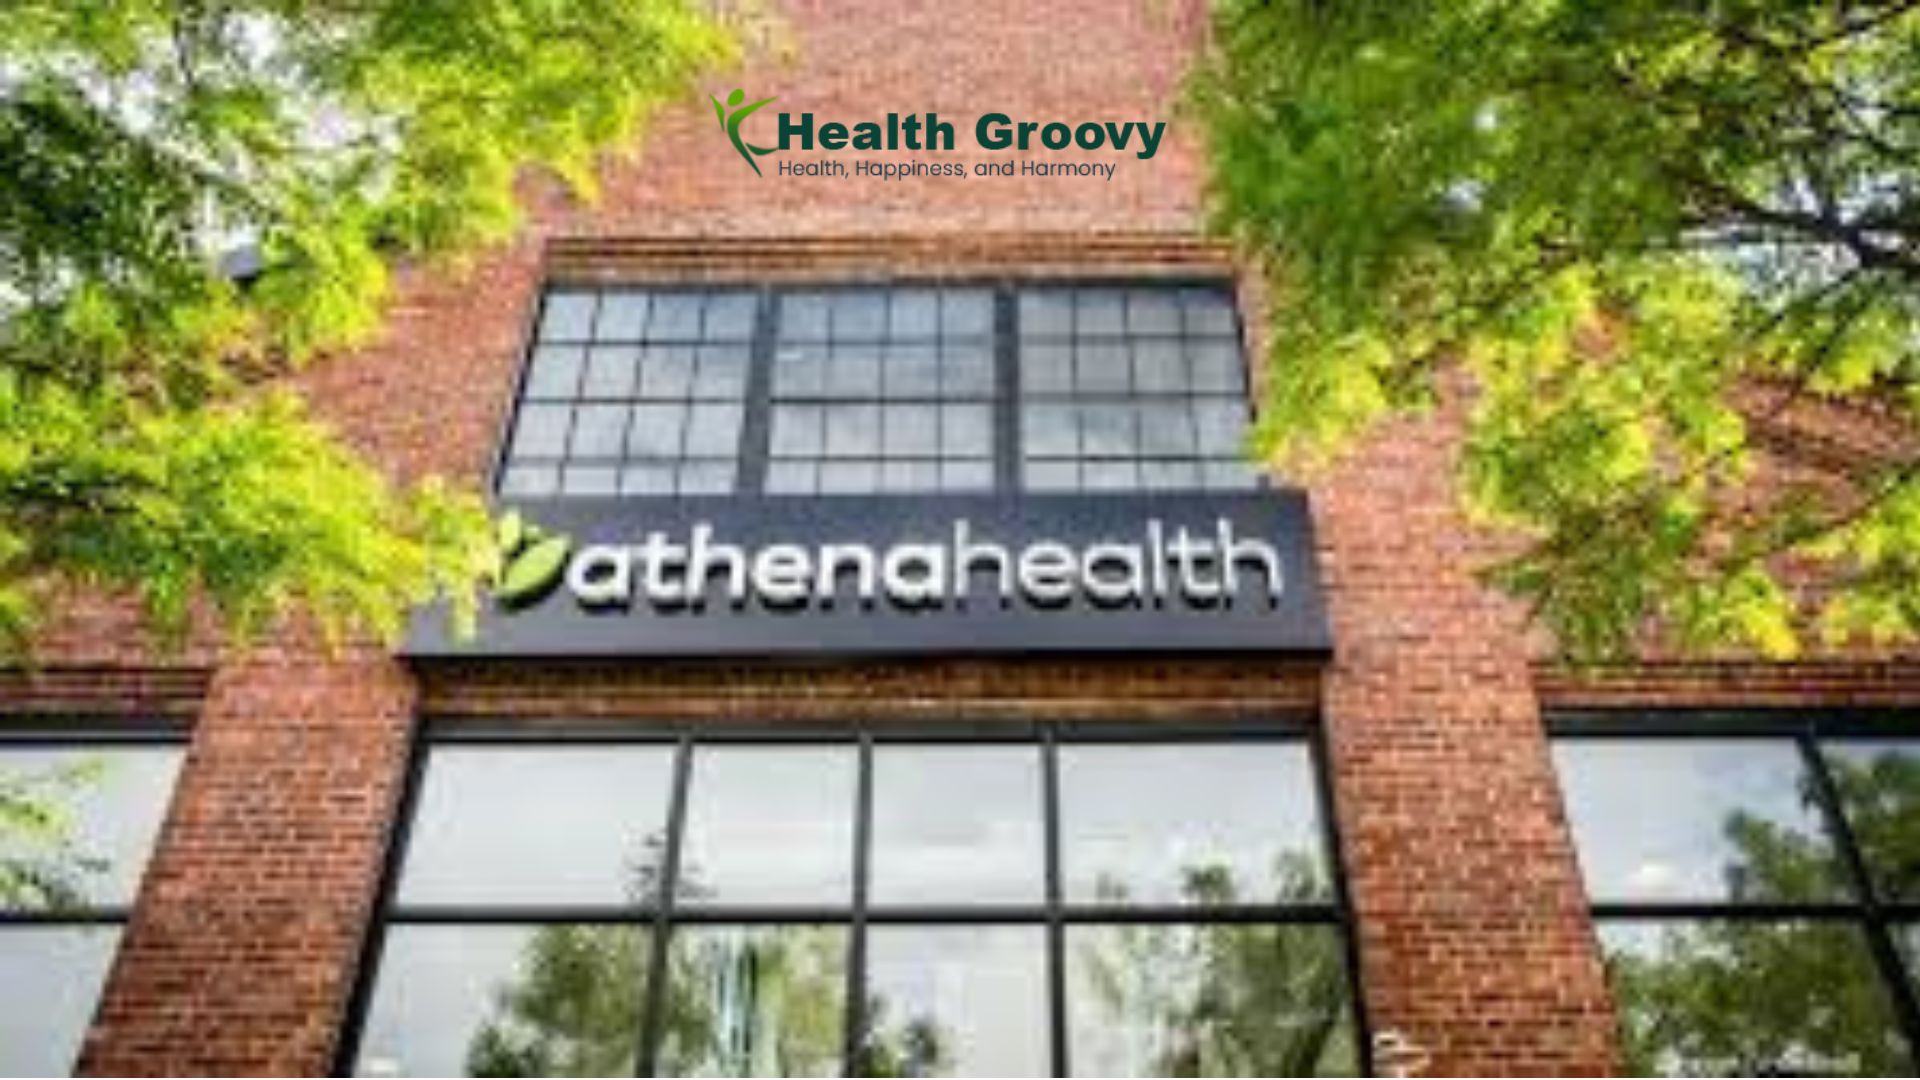 In this simple guide that we are giving here, we are going to give you a comprehensive review of the AthenaOne application which is a very brilliant software that helps a lot of people in getting medical prescriptions and help whenever they want. Here, you are going to know every bit of information that you need to know about AthenaOne. What is AthenaOne? AthenaOne is very awesome software that has been created by AthenaHealth to ensure that all individuals get medical help and proper treatment whenever they receive it. The website offers extensive schedules and proper patient and doctor charting that will help them whenever they require it. You might think that there are many other applications available, so, if you are thinking, what makes Athena provider login so different is its consolation-based approach where you can get free and easy consultation for all the patients that they receive. Why is AthenaHealth best for reporting? Athena health provider login is a very awesome application and the application has been credited as the best medical software for reporting as the application has proper reports that are presented weekly and monthly. The application also compares your reports with that of other practices that are present in the AthenaNet network. What are the main benefits of using AthenaHealth Provider? Now, we also know that it is very common for people to question why they should use this application and what are the benefits they will receive if they use the AthenaOne application. So here you are going to know about all of them here in detail. The reporting options and other features of the website and application are customizable and you can easily create the reports according to your needs. The application has multiple filters that make it very easy for people to create their profiles and get all the medical help that they need. Clinicians will also benefit a lot with the help of Athena login provider as the website sends out representatives to help people and practices so that they can manage their proactive well. The user-friendliness of the platform is very commendable as people have found it pretty conformable and easy to use the application and website whenever they have use for the same. We hope that you are satisfied with all the information that you have received here in the guide and we hope that you can make use of this information for your benefit. Also read: Complete Login Process on Athena One Mobile App